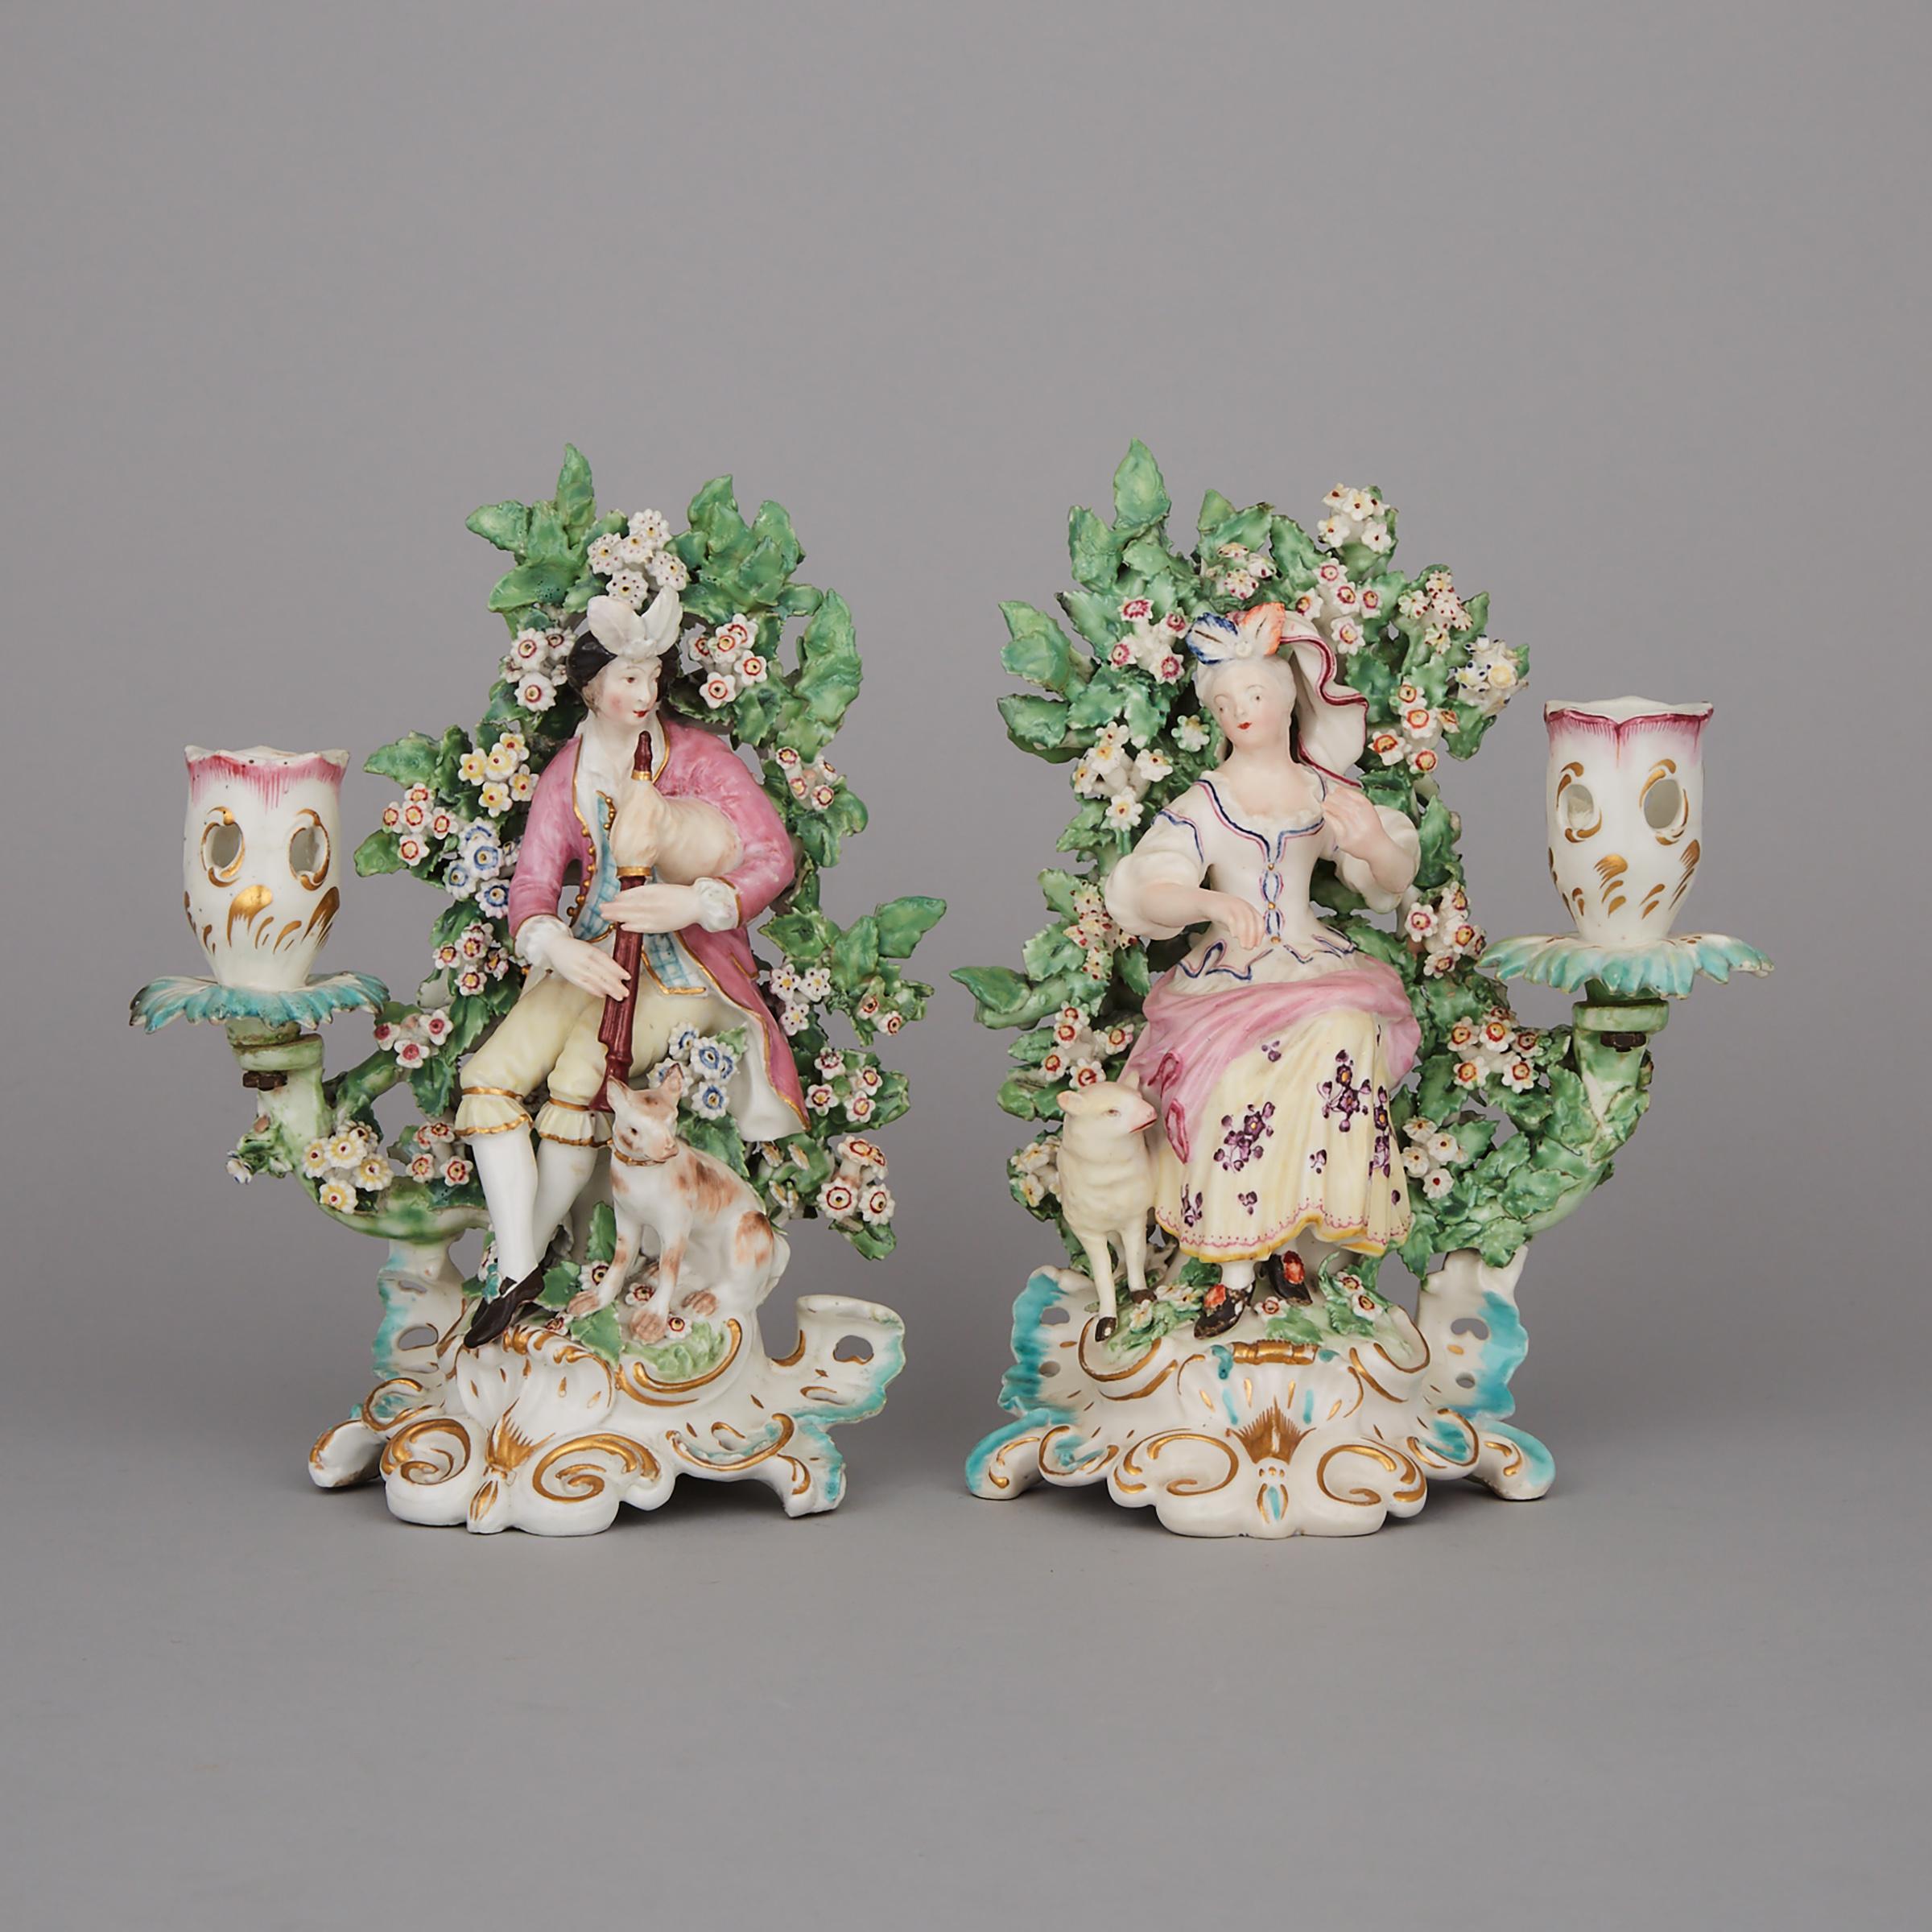 Pair of Derby Bocage Candlestick Figures of a Shepherd Musician and Companion, c.1765-75